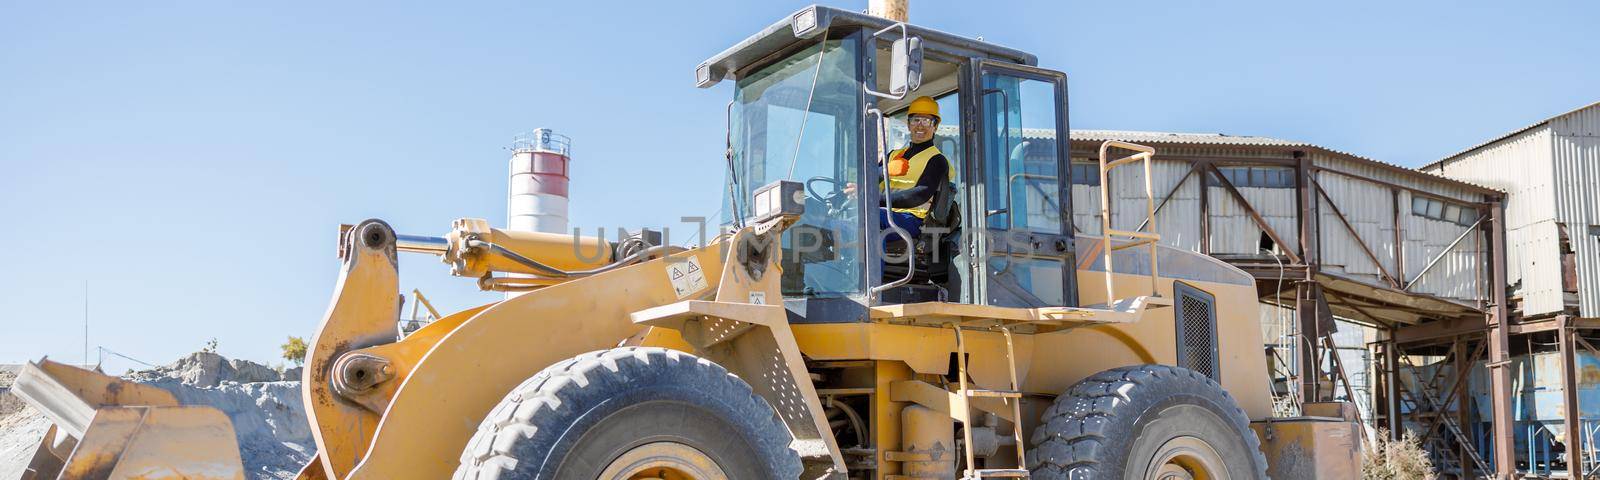 Cheerful male worker looking at camera and smiling while sitting in tractor driver cabin at industrial plant under blue sky